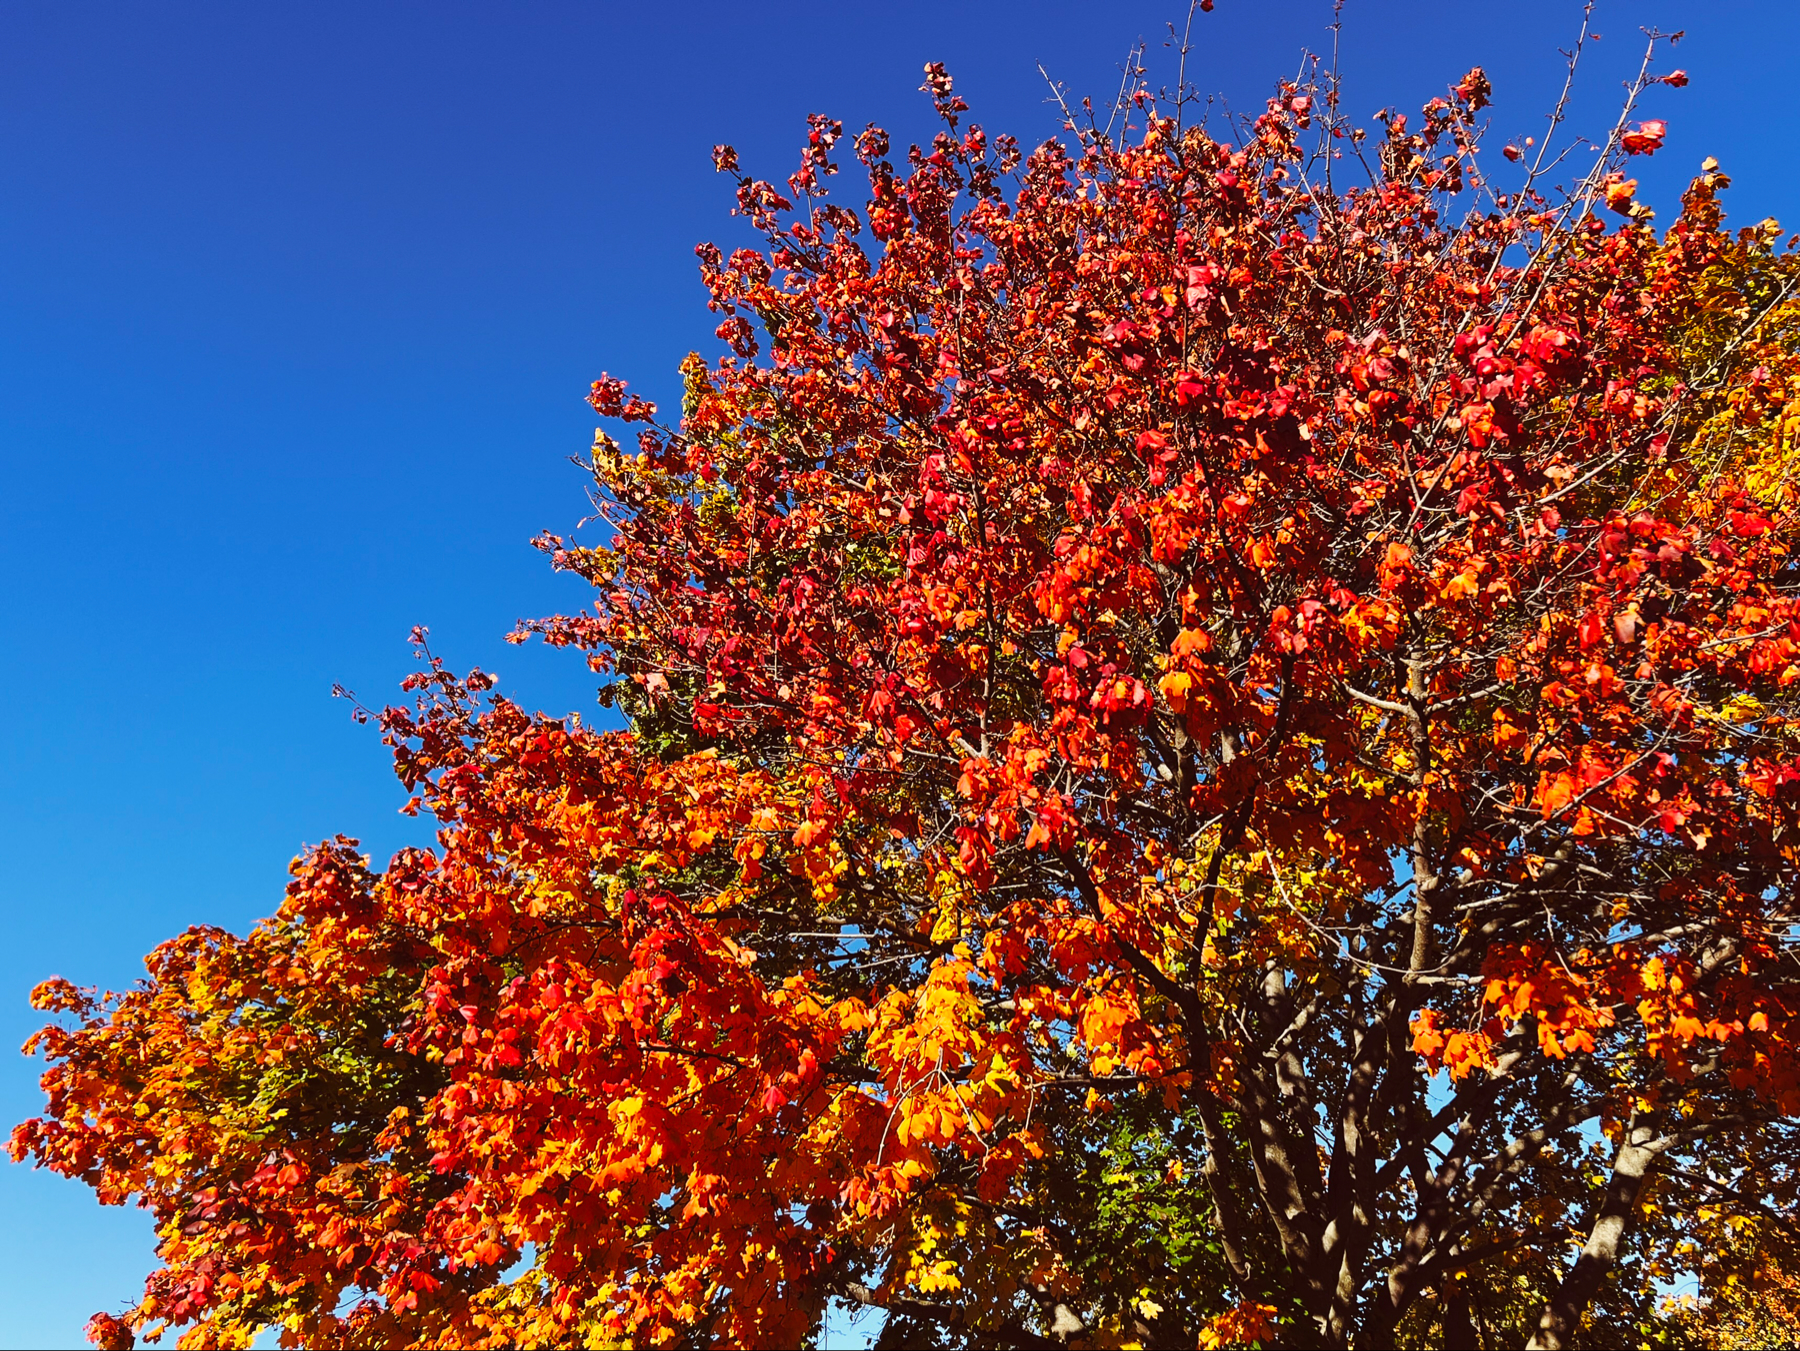 A tree sitting against the backdrop of a cloudless, bright blue sky. The leaves are subtle green and yellow at the bottom, bright orange and yellow in the middle, and a deep red at the top.